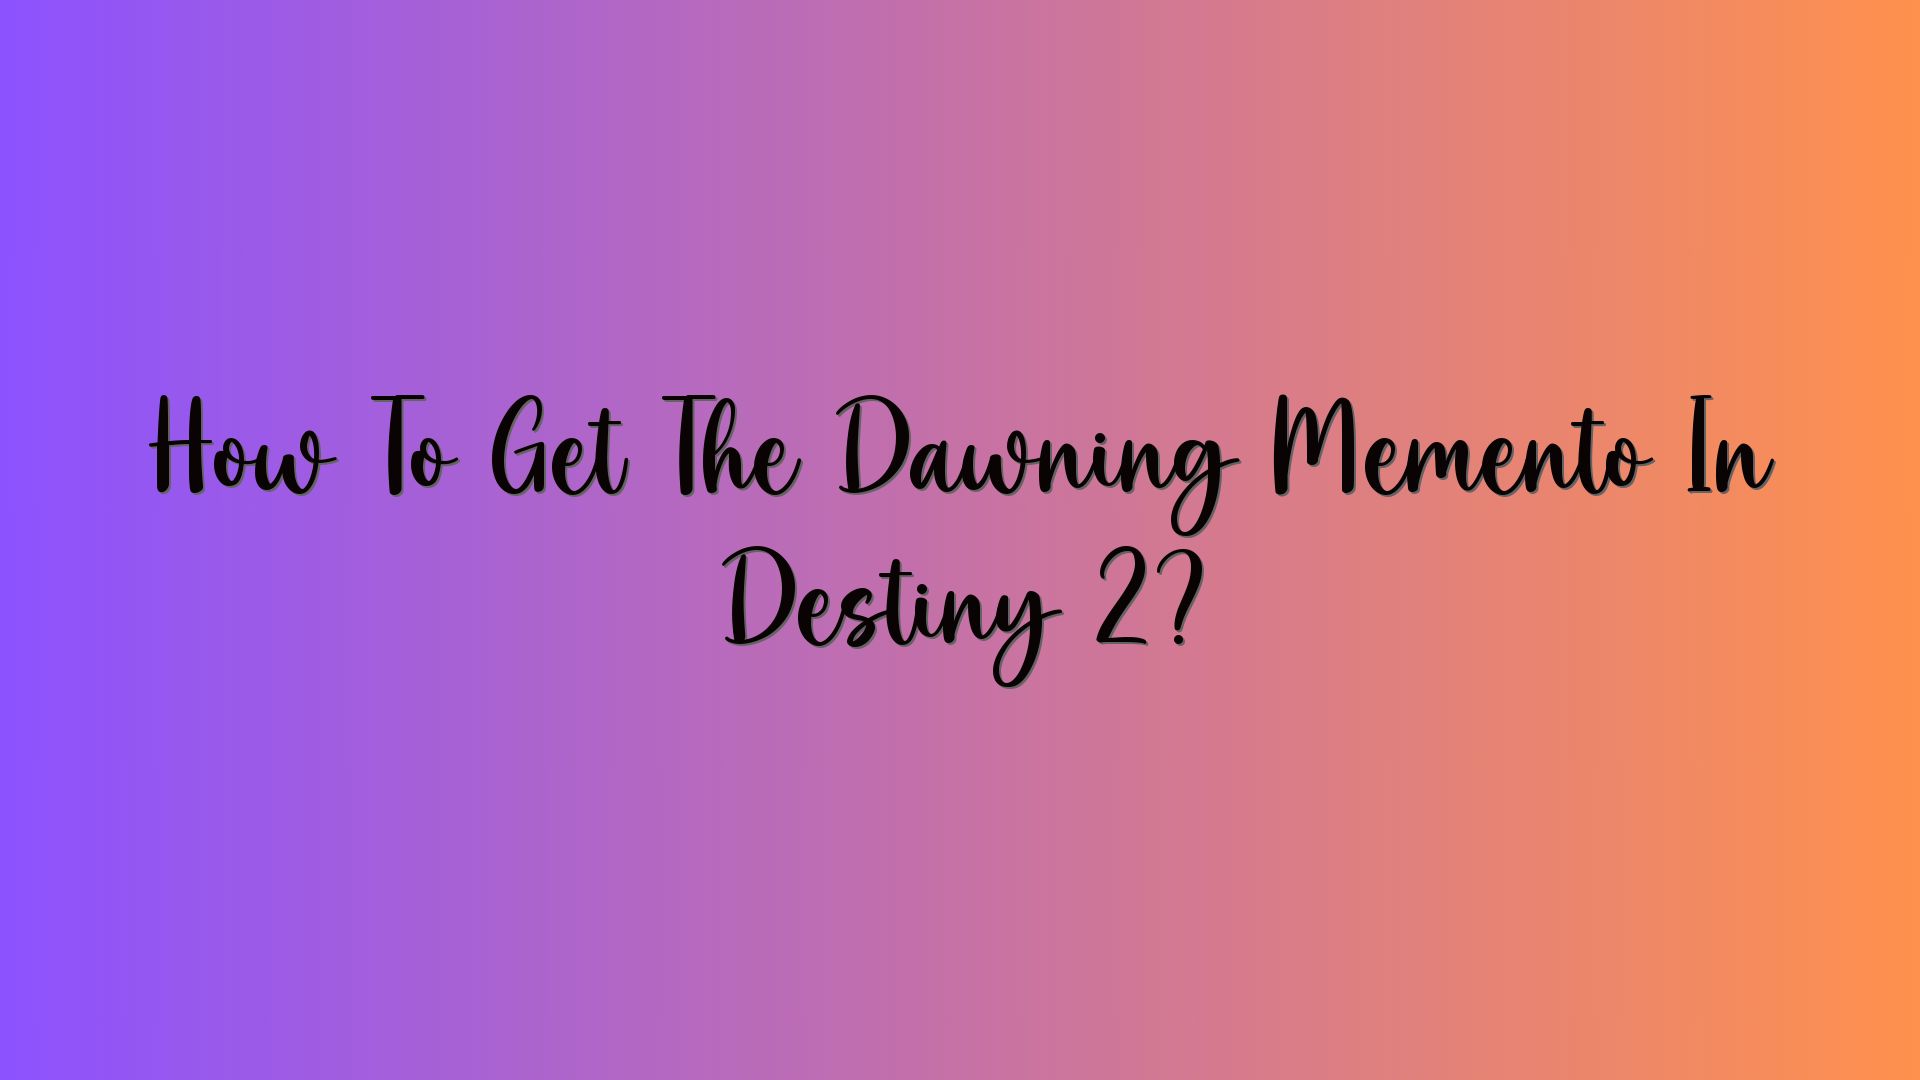 How To Get The Dawning Memento In Destiny 2?